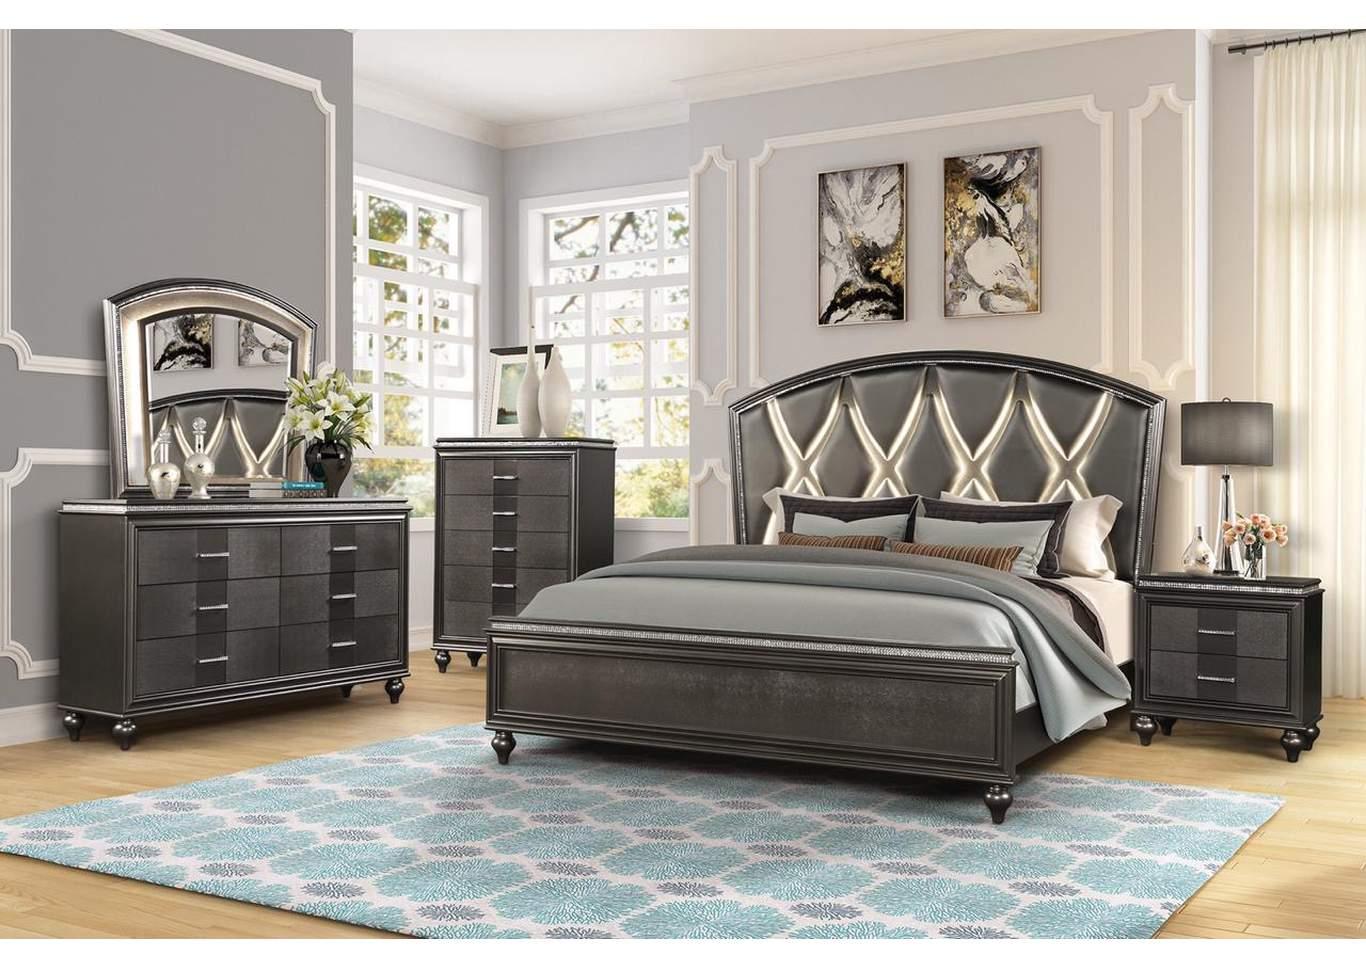 Contemporary, Modern Panel Bedroom Set GINGER GHF-808857791573 in Gunmetal Eco Leather